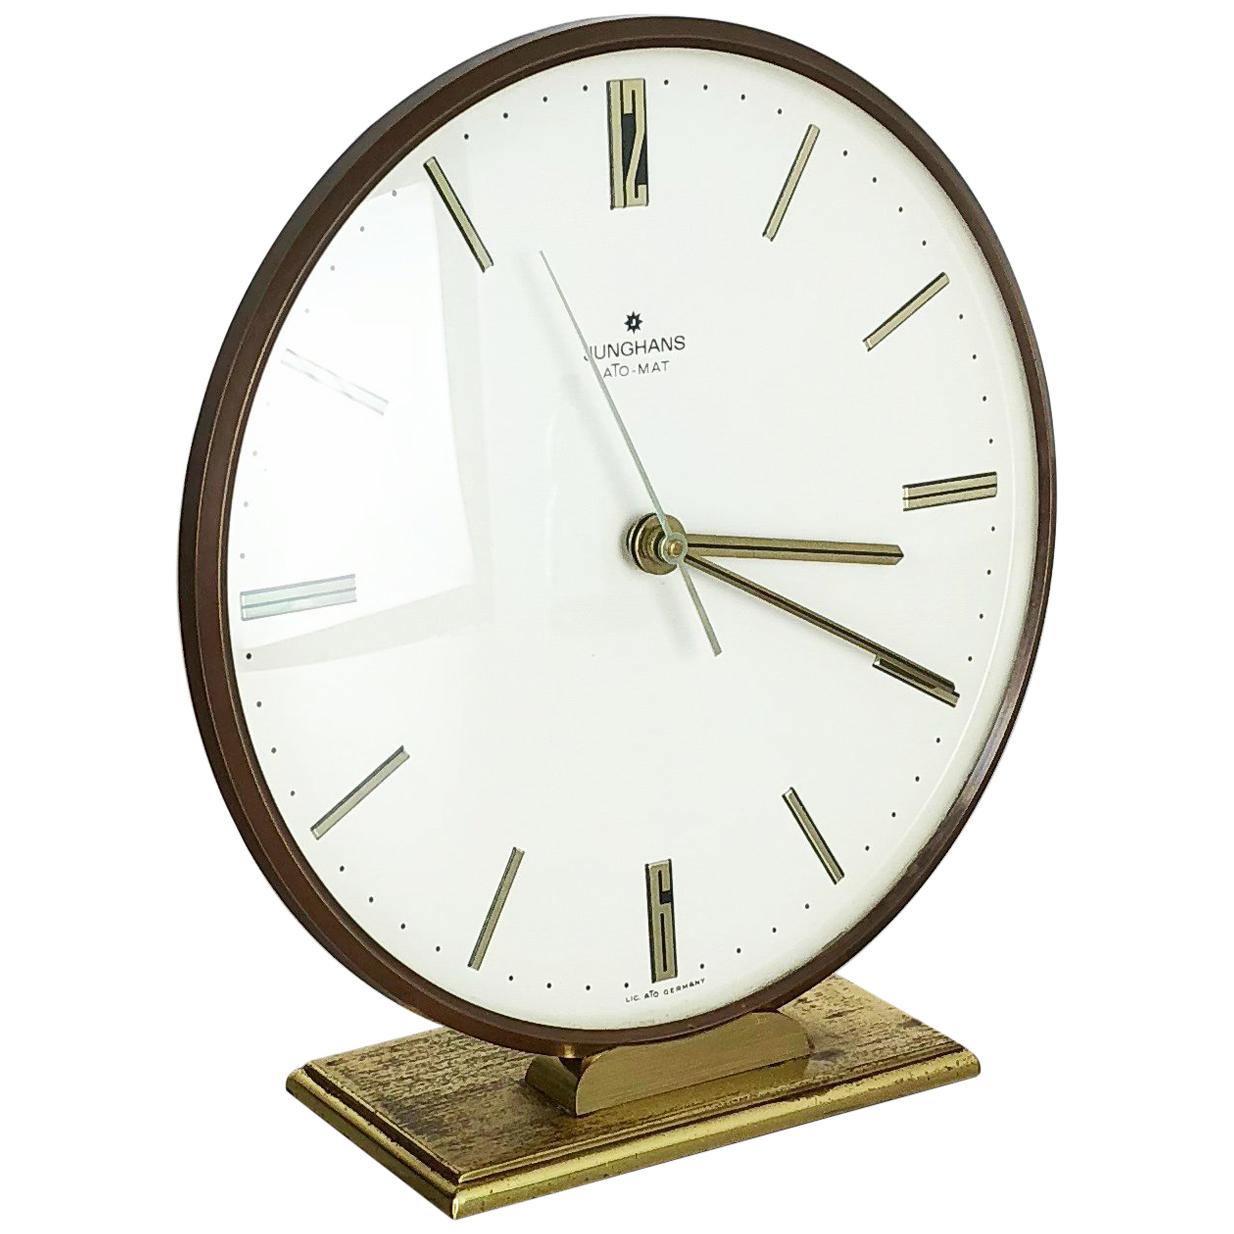 Vintage 1960s Modernist Brass Metal Ato, Mat Table Clock by Junghans, Germany